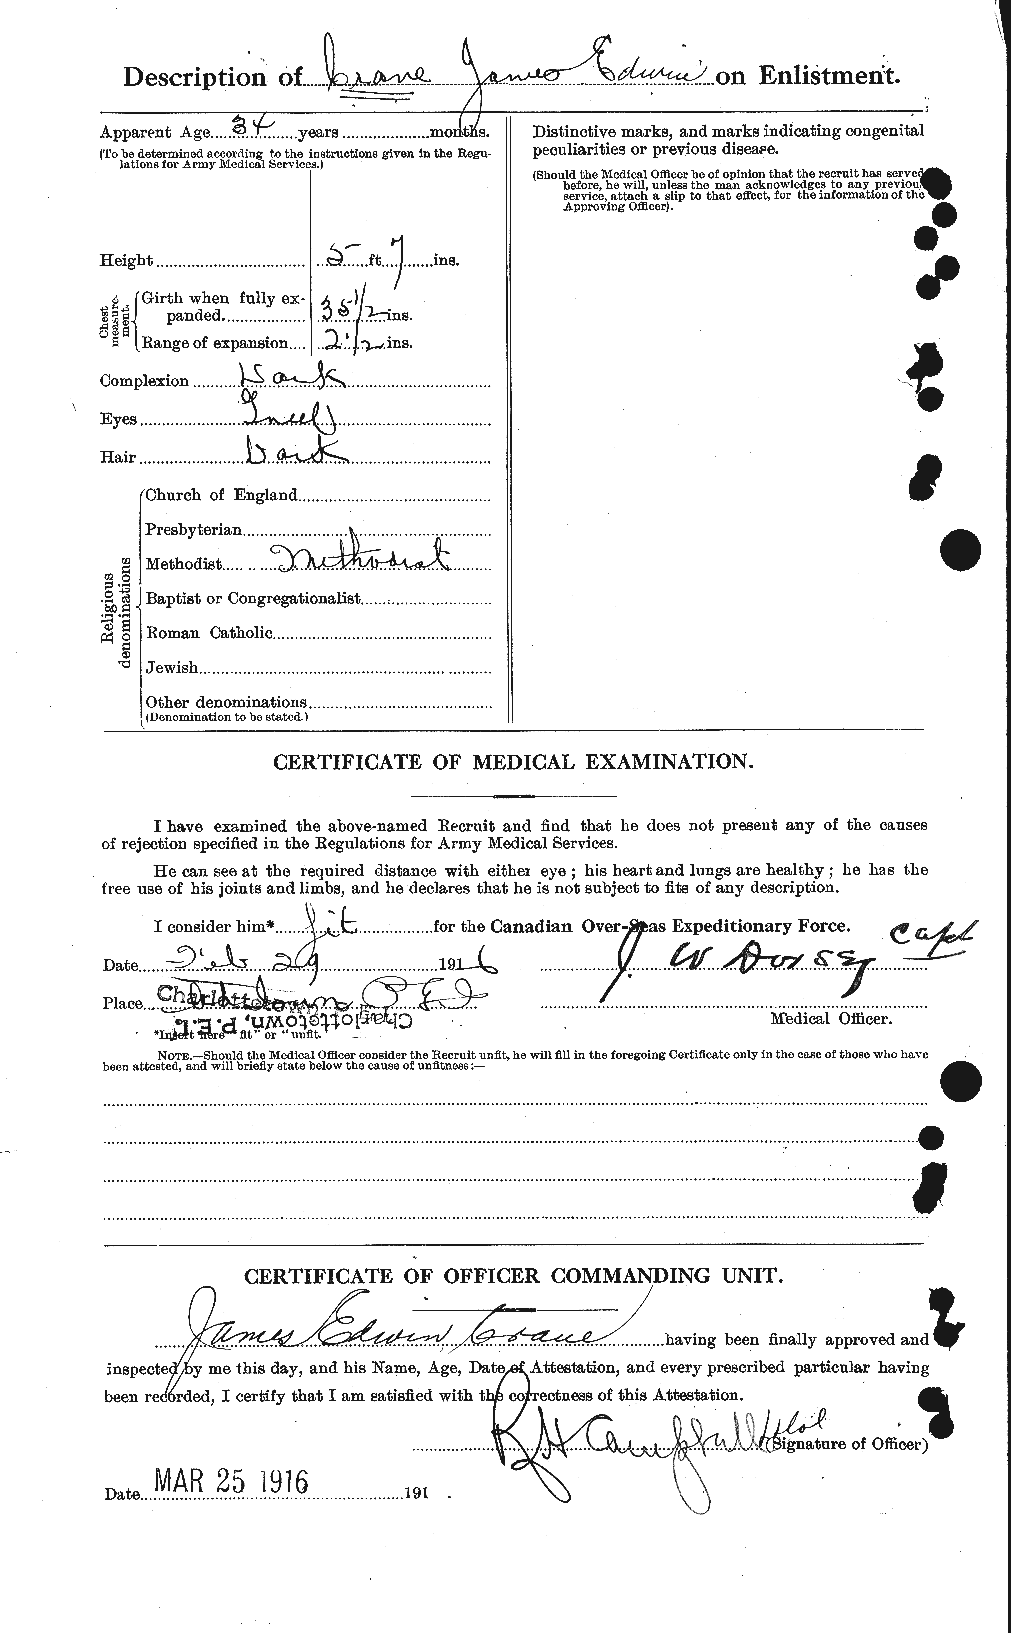 Personnel Records of the First World War - CEF 061773b